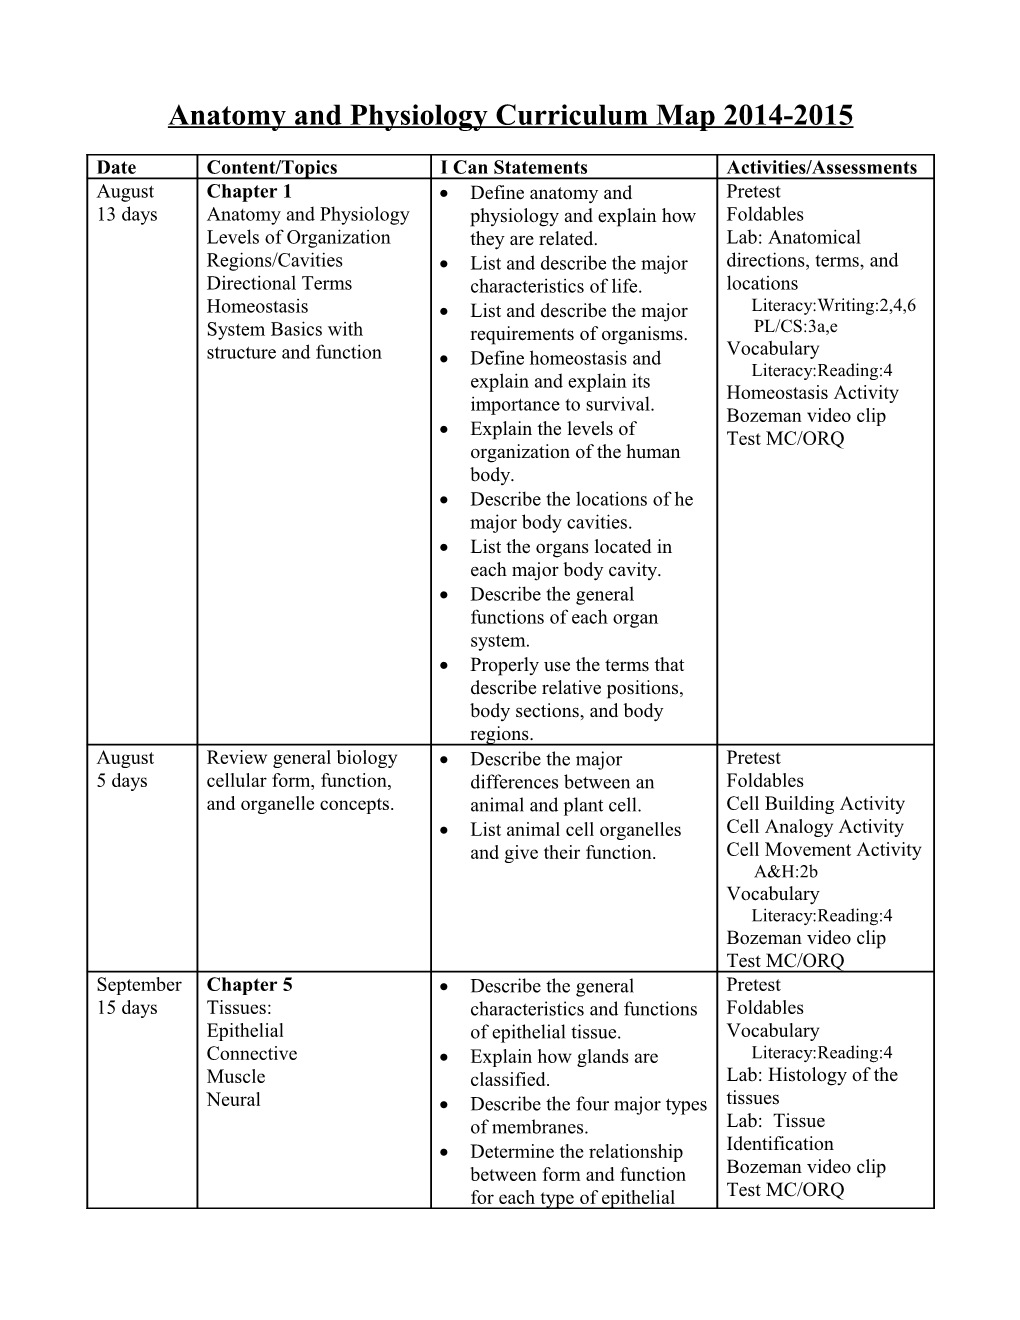 Anatomy and Physiology Curriculum Map 2103-2014